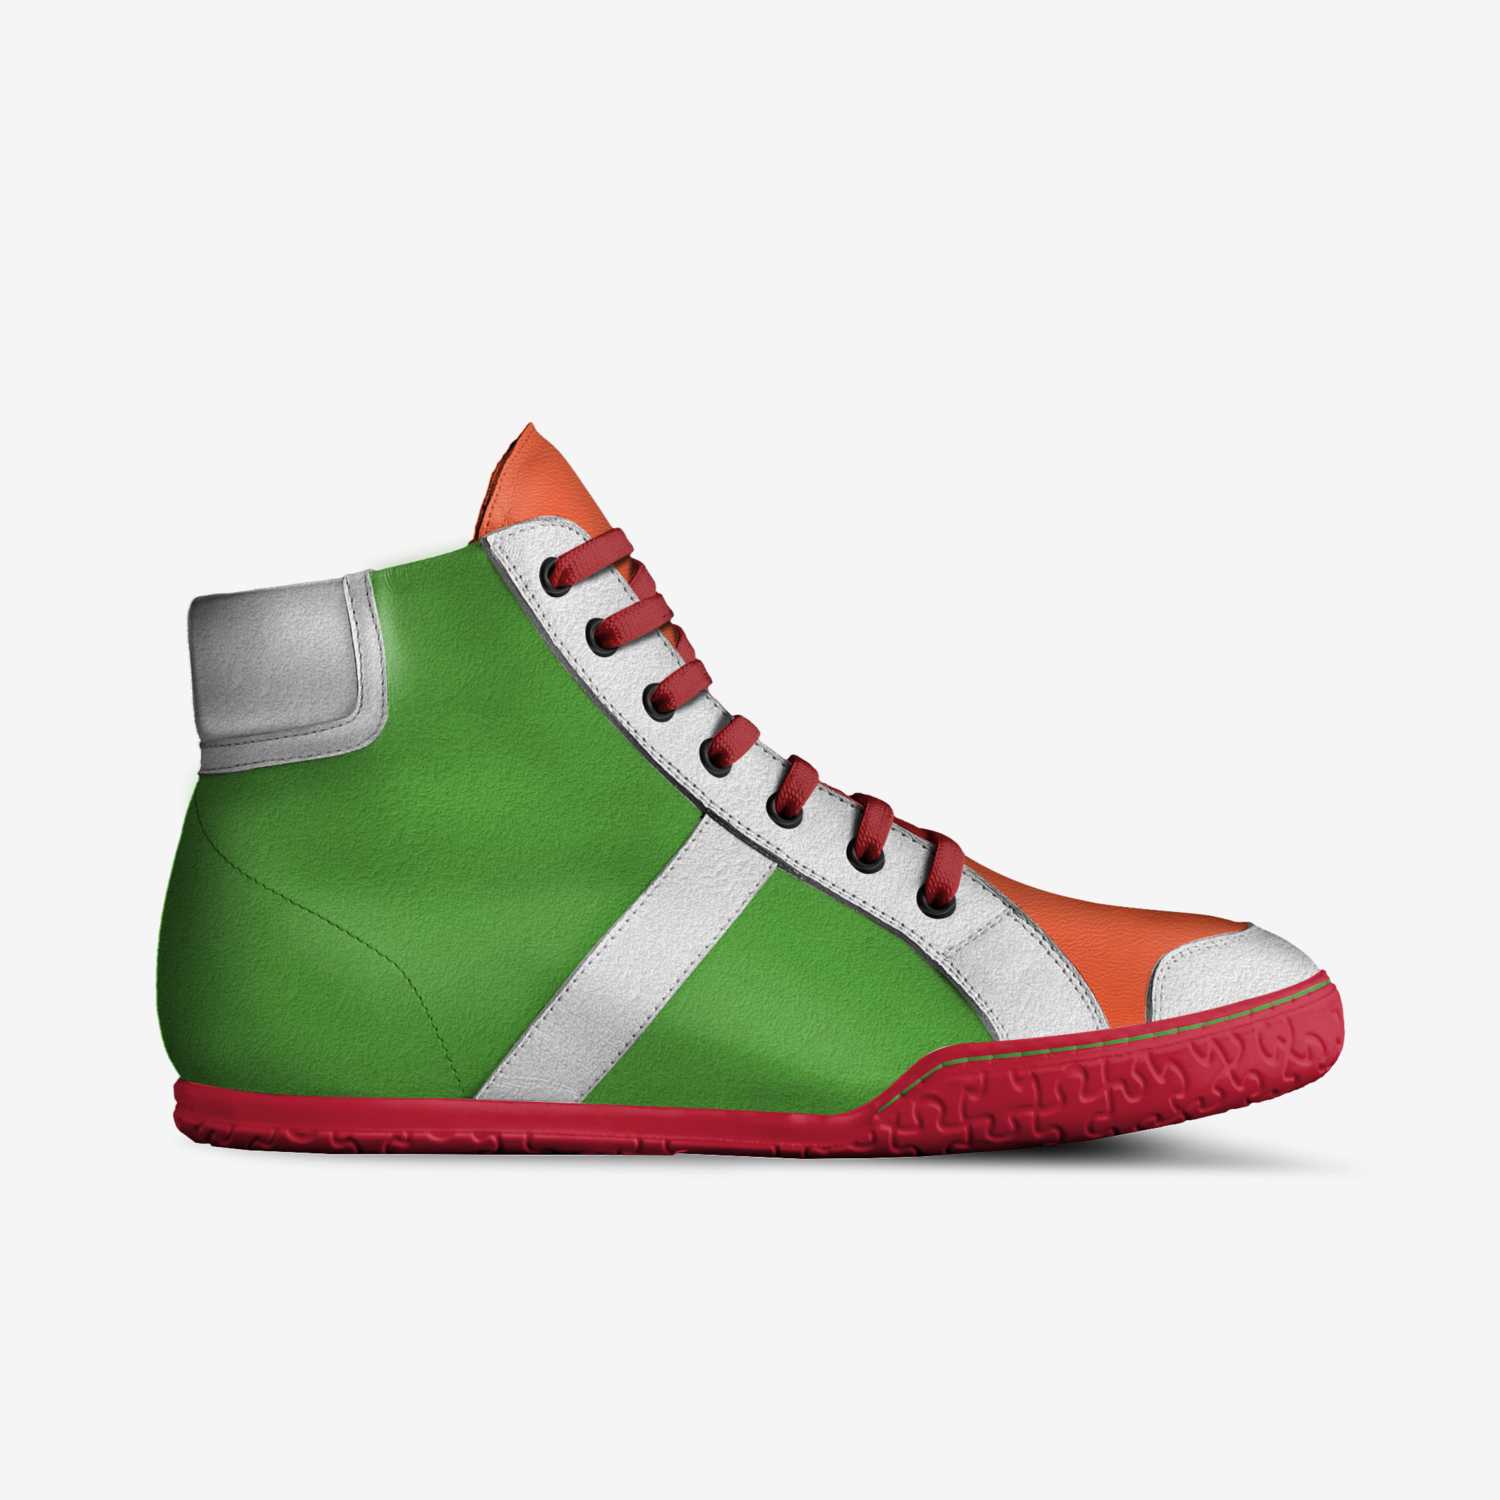 SuppaD's custom made in Italy shoes by David van Der Krogt | Side view